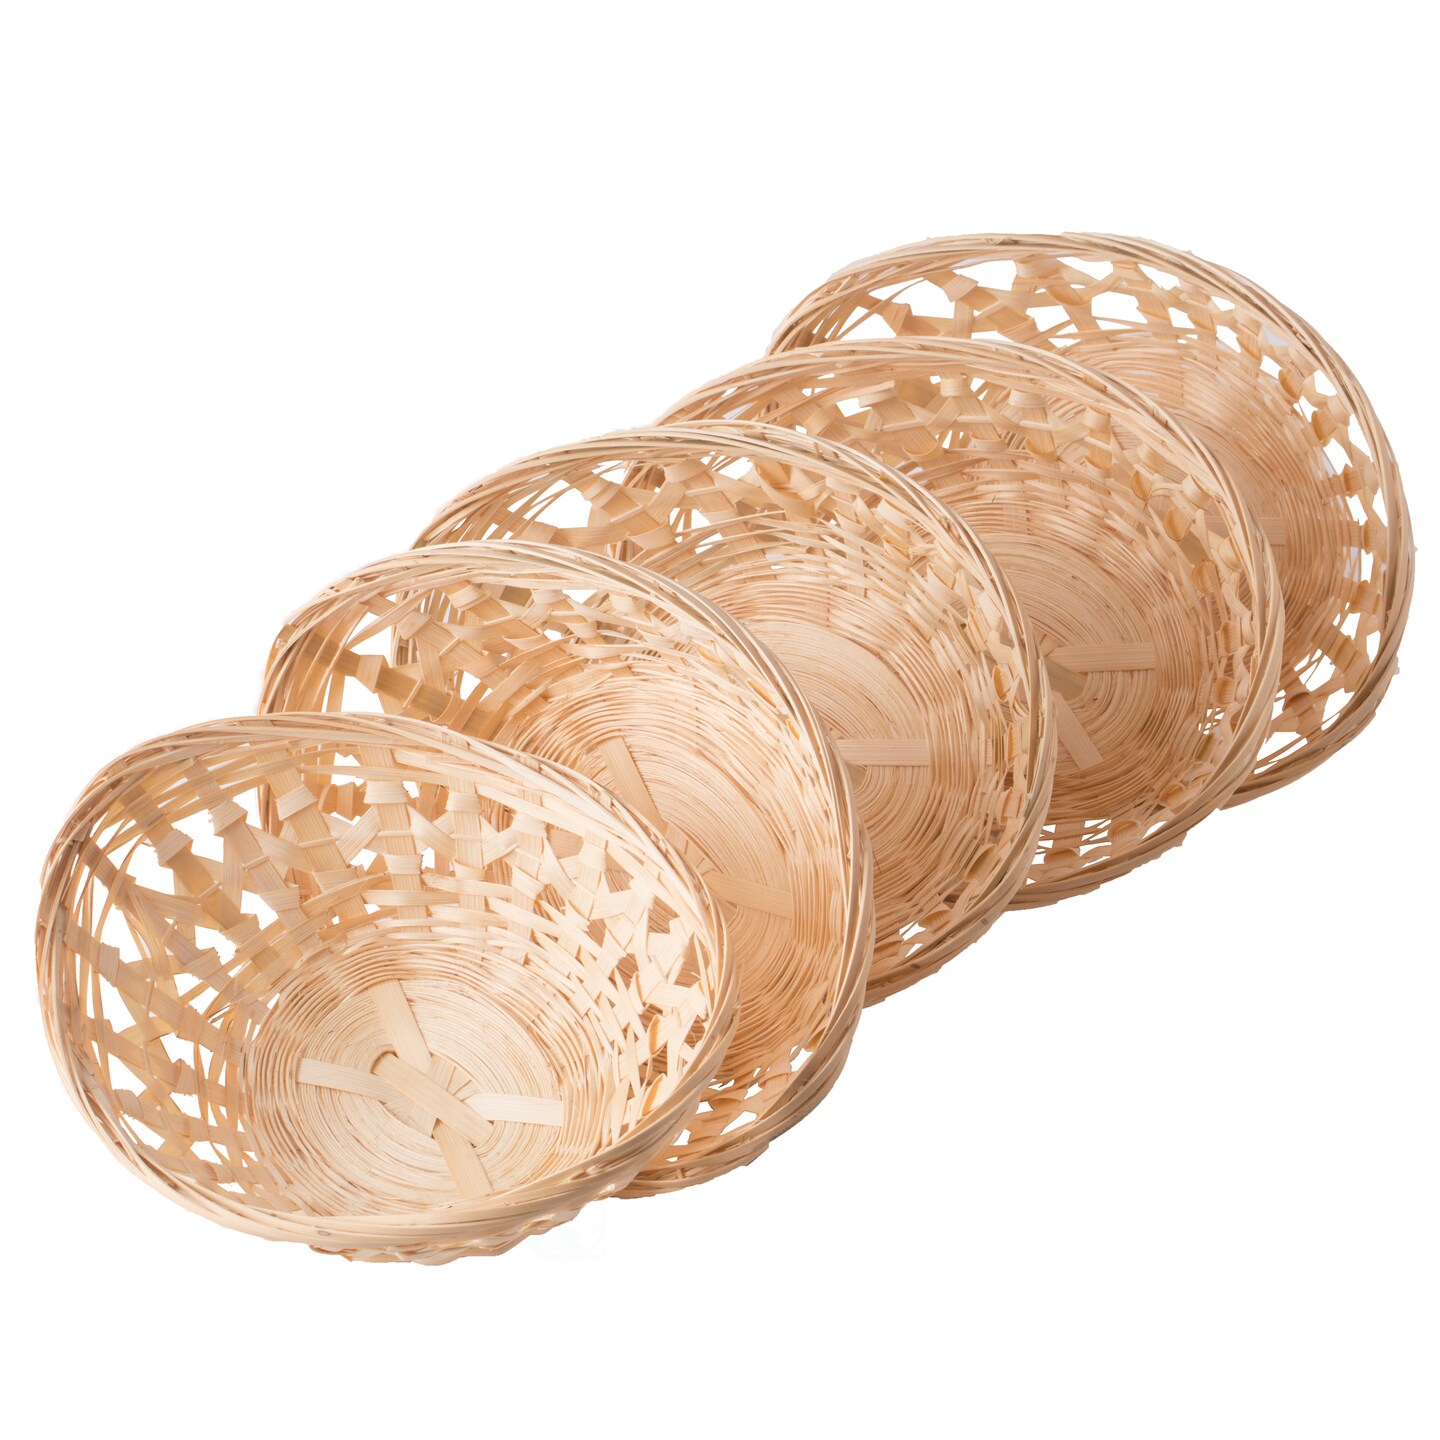 Wickerwise Set of 5 Natural Bamboo Oval Storage Bread Basket Storage Display Trays